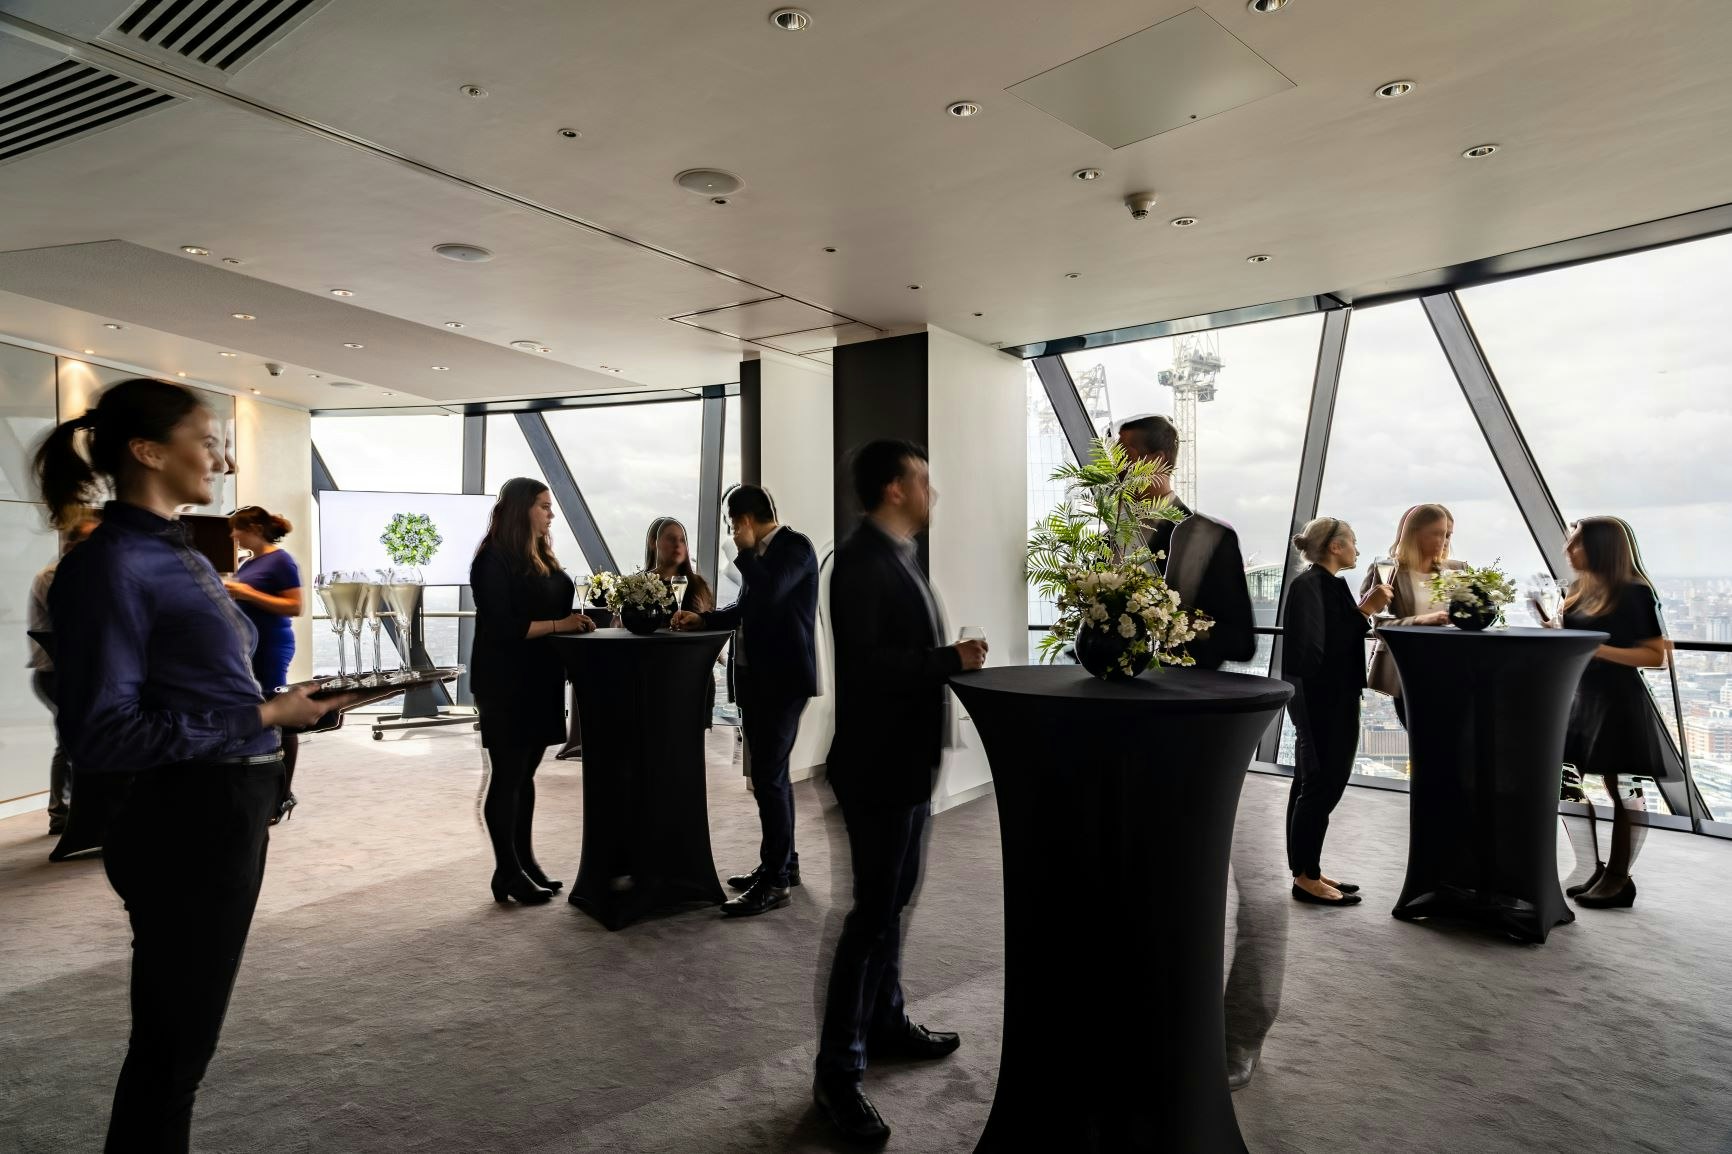 Searcys at the Gherkin - Exclusive hire of Level 38 image 3